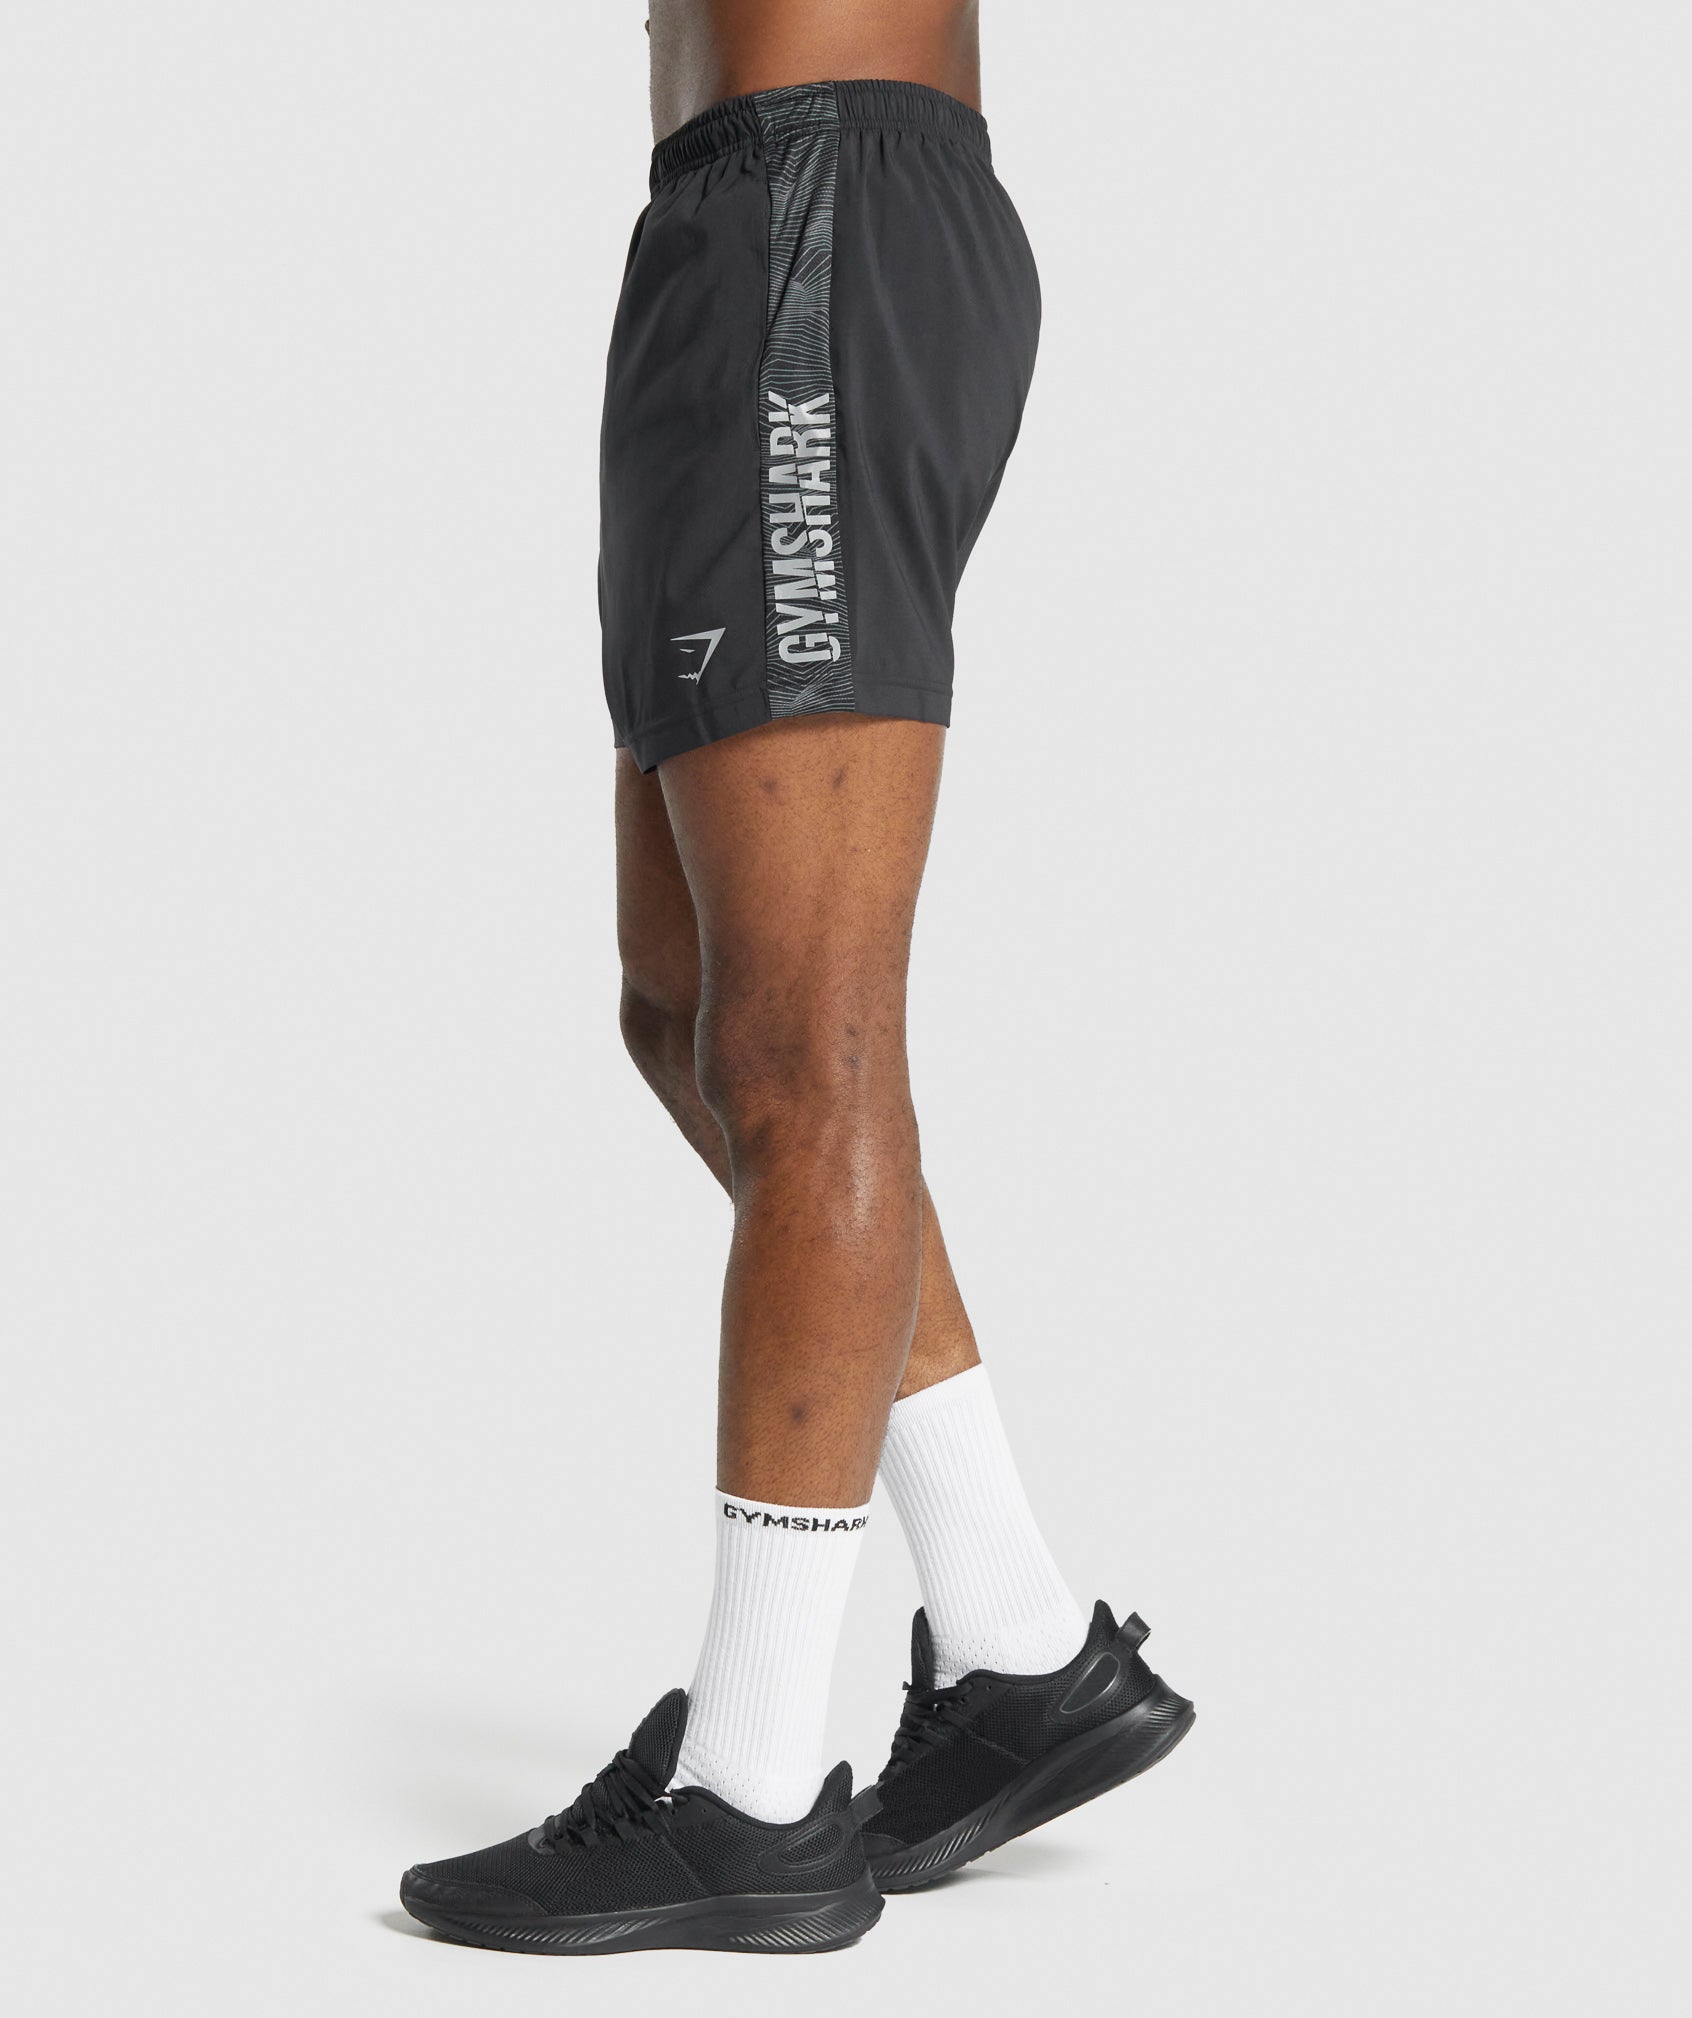 Gymshark Graphic Sport Shorts - Black – Client 446 100K products